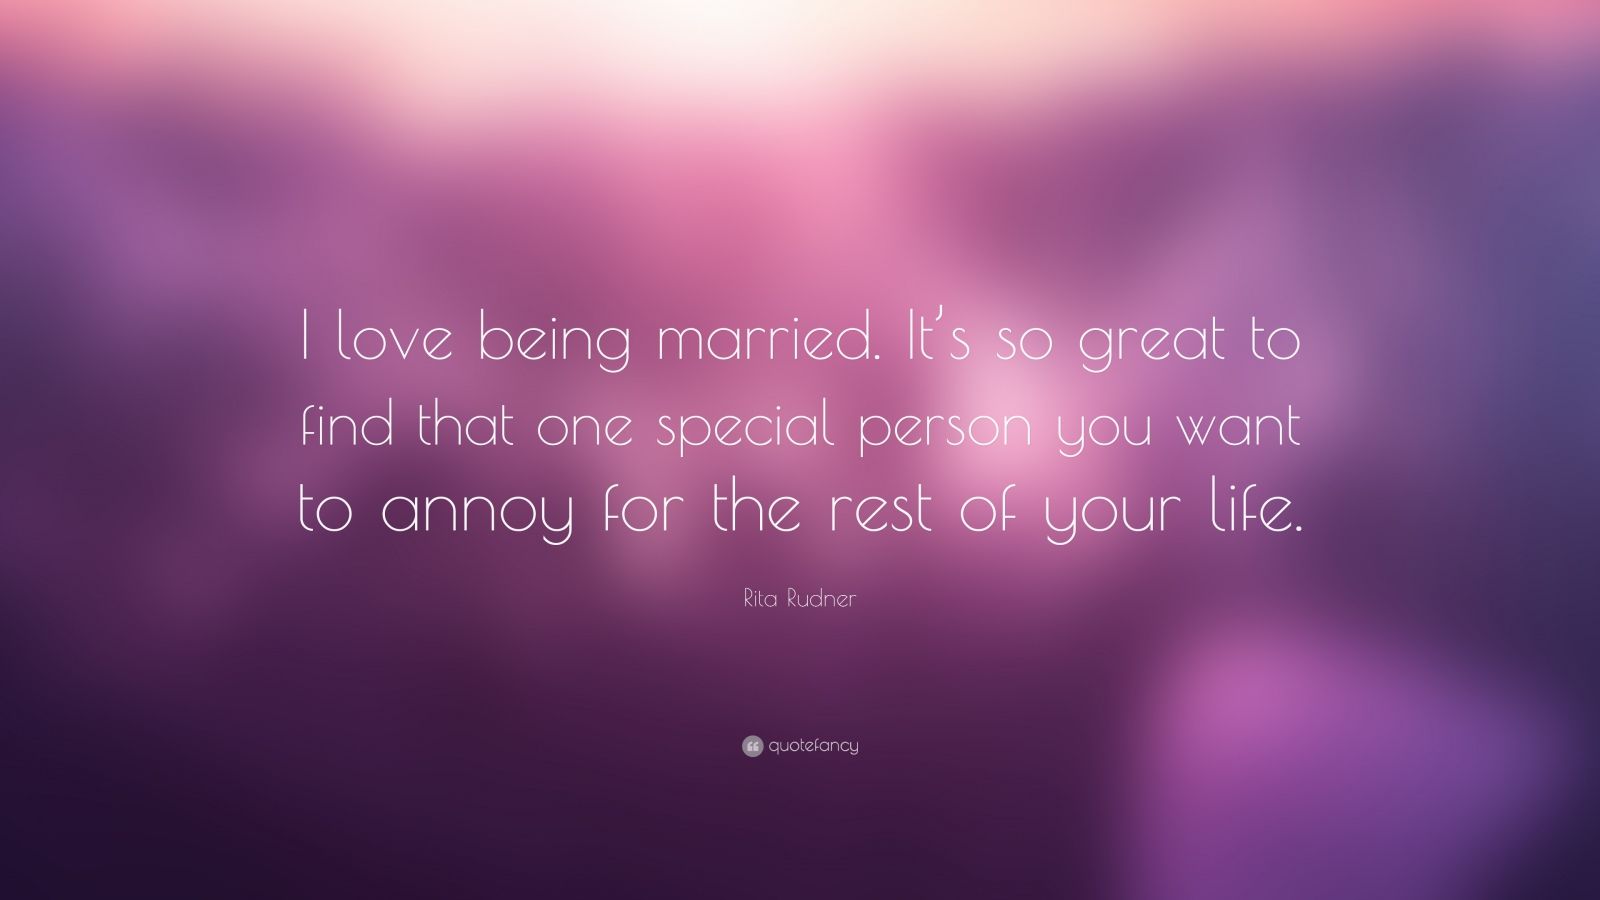 Rita Rudner Quote: “I love being married. It’s so great to find that ...